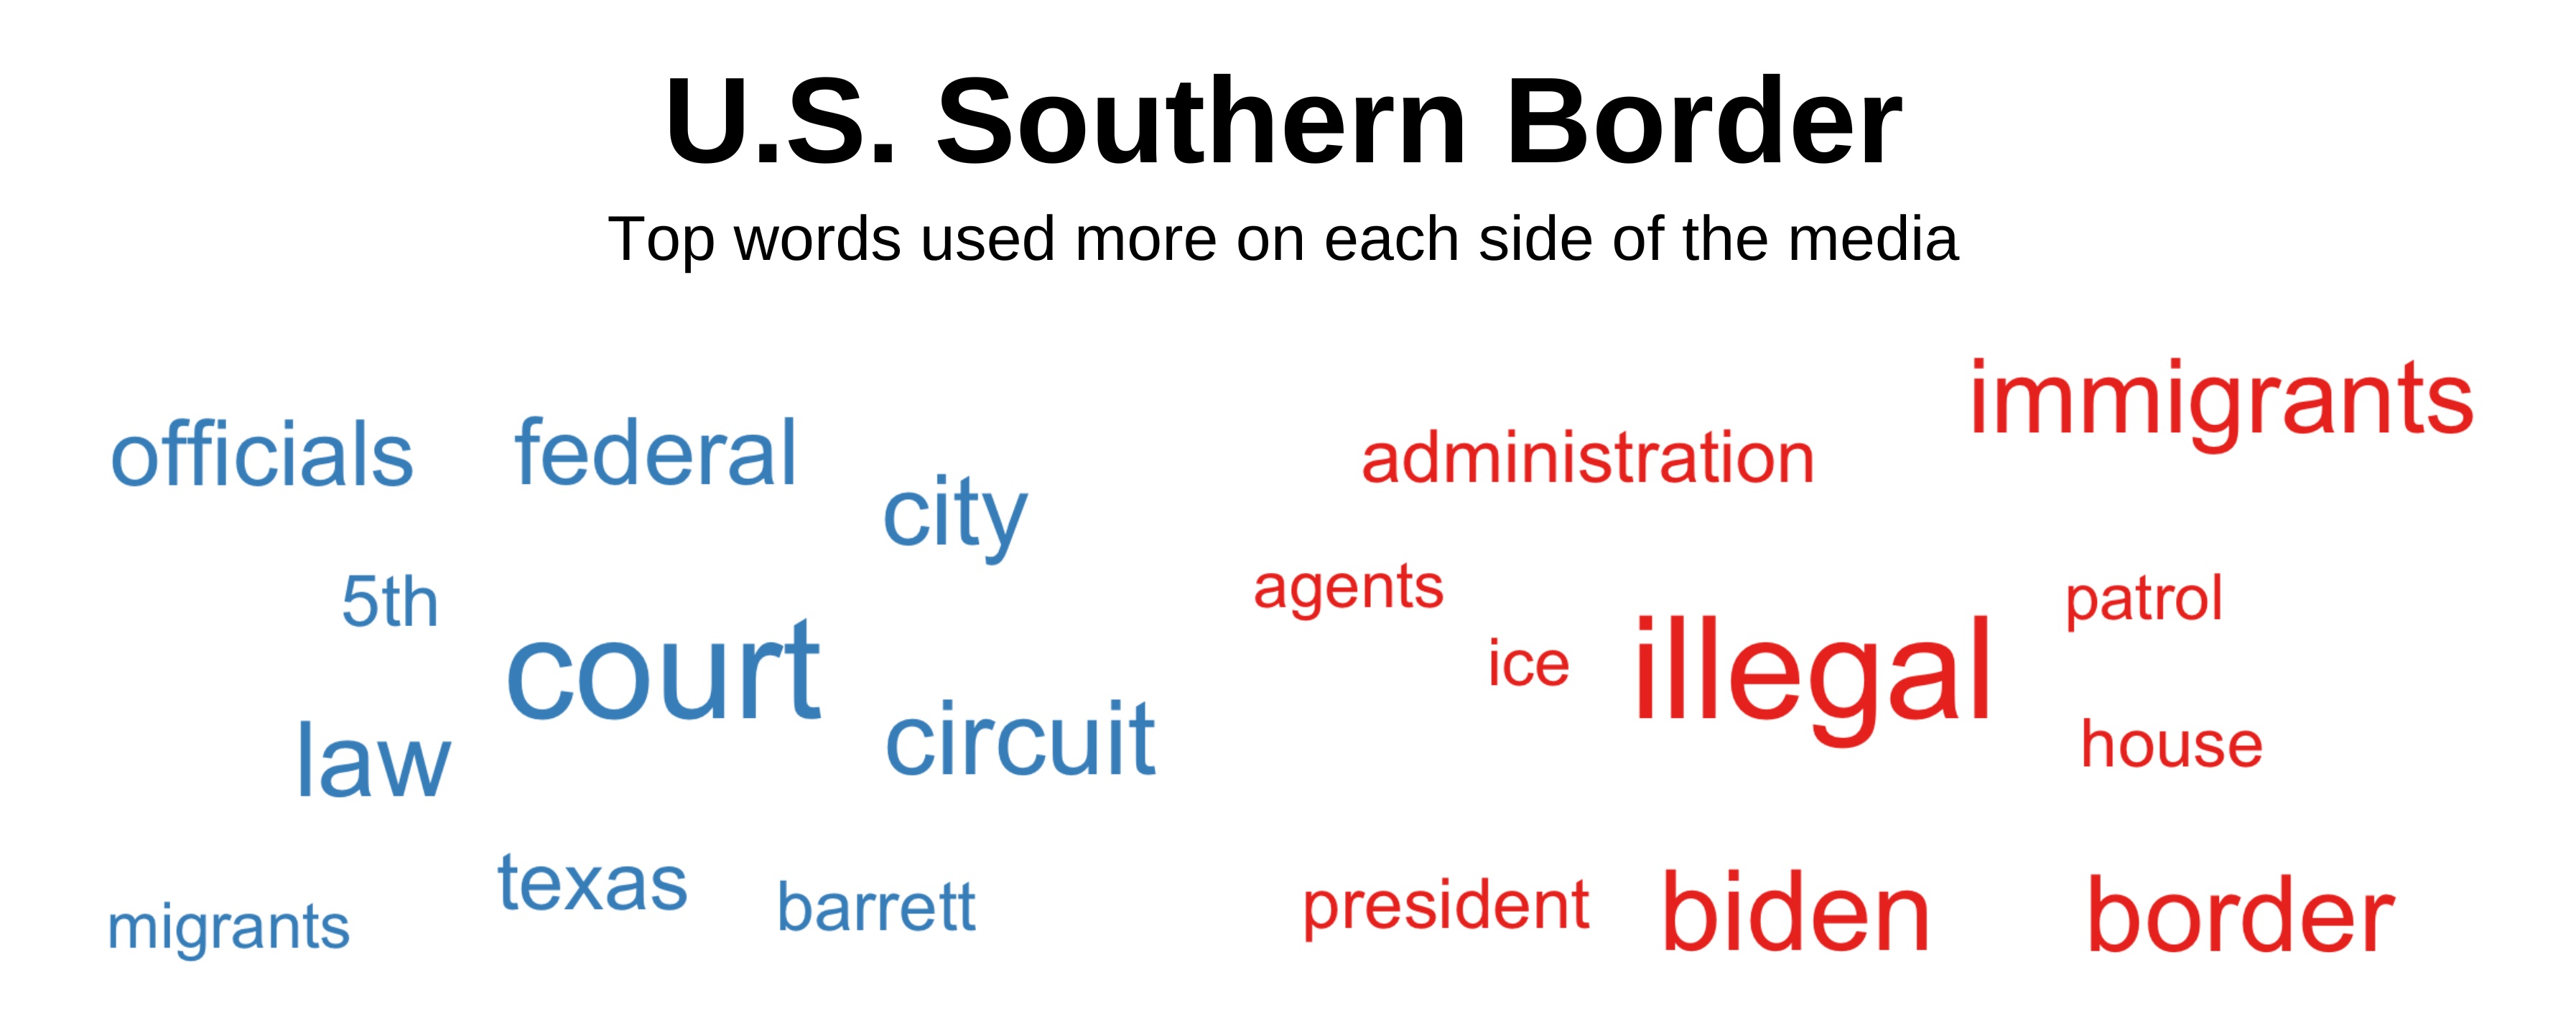 Top words about the southern border used more on each side of the media.